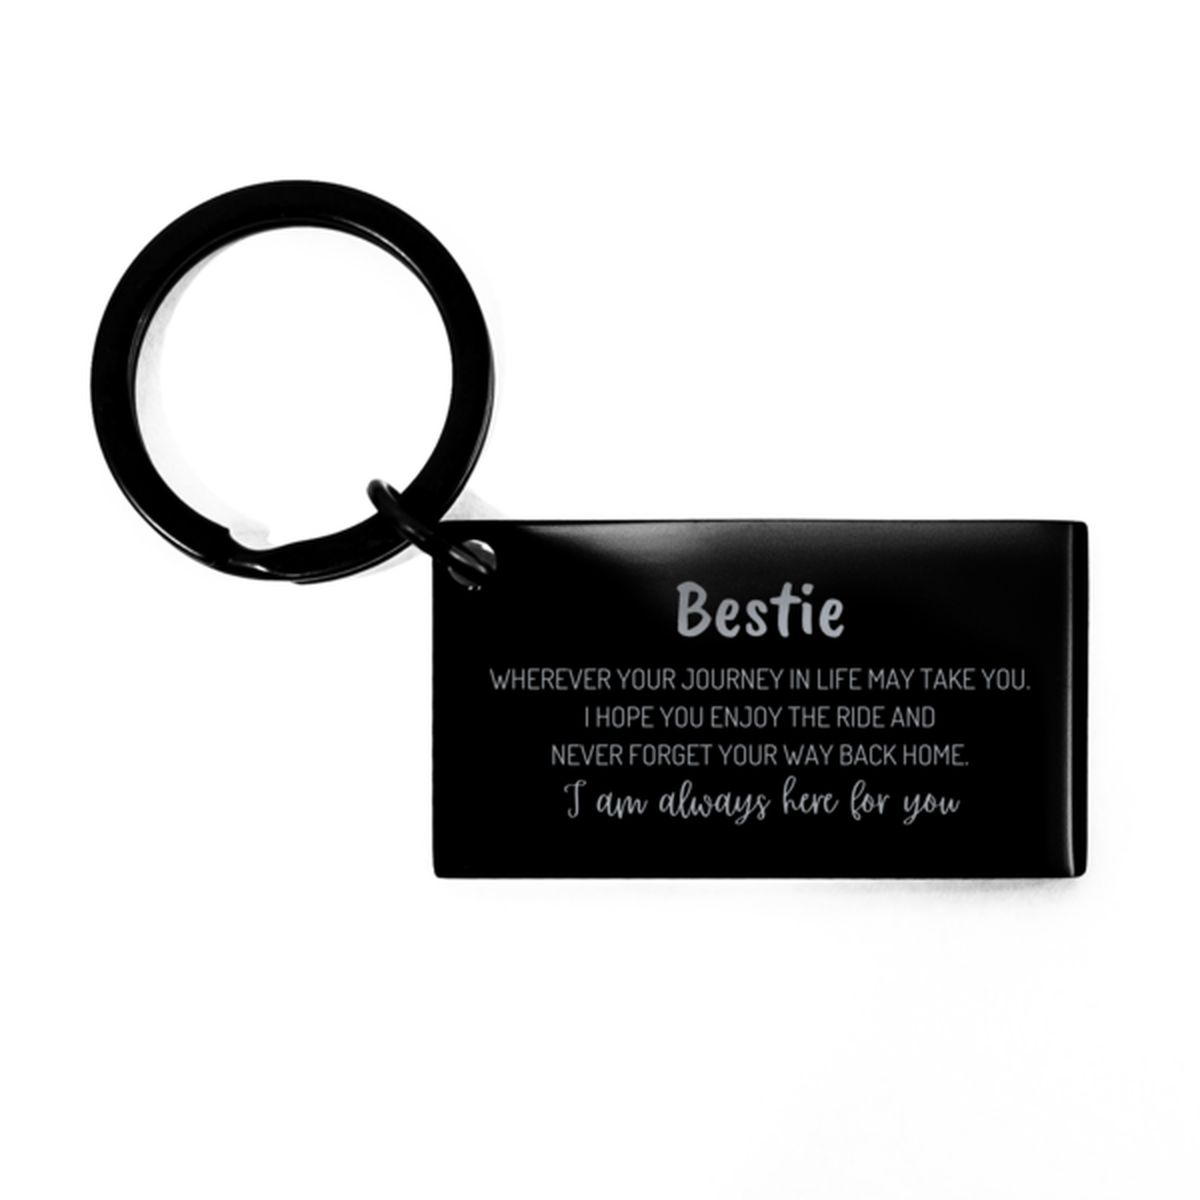 Bestie wherever your journey in life may take you, I am always here for you Bestie Keychain, Awesome Christmas Gifts For Bestie, Bestie Birthday Gifts for Men Women Family Loved One